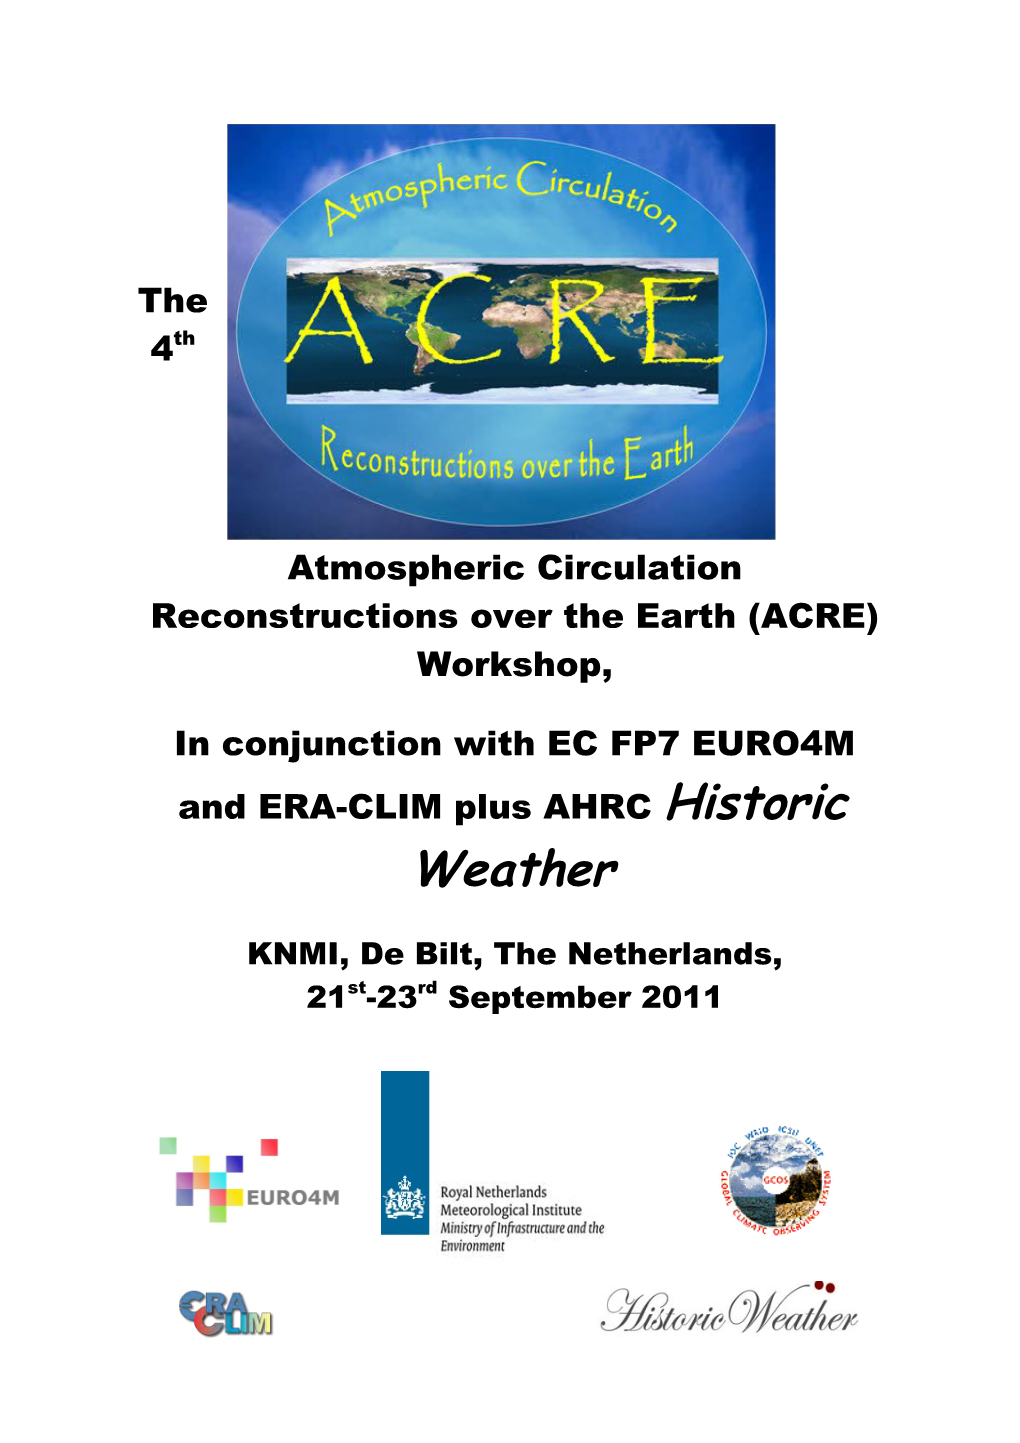 The 4Thatmospheric Circulation Reconstructions Over the Earth (ACRE) Workshop